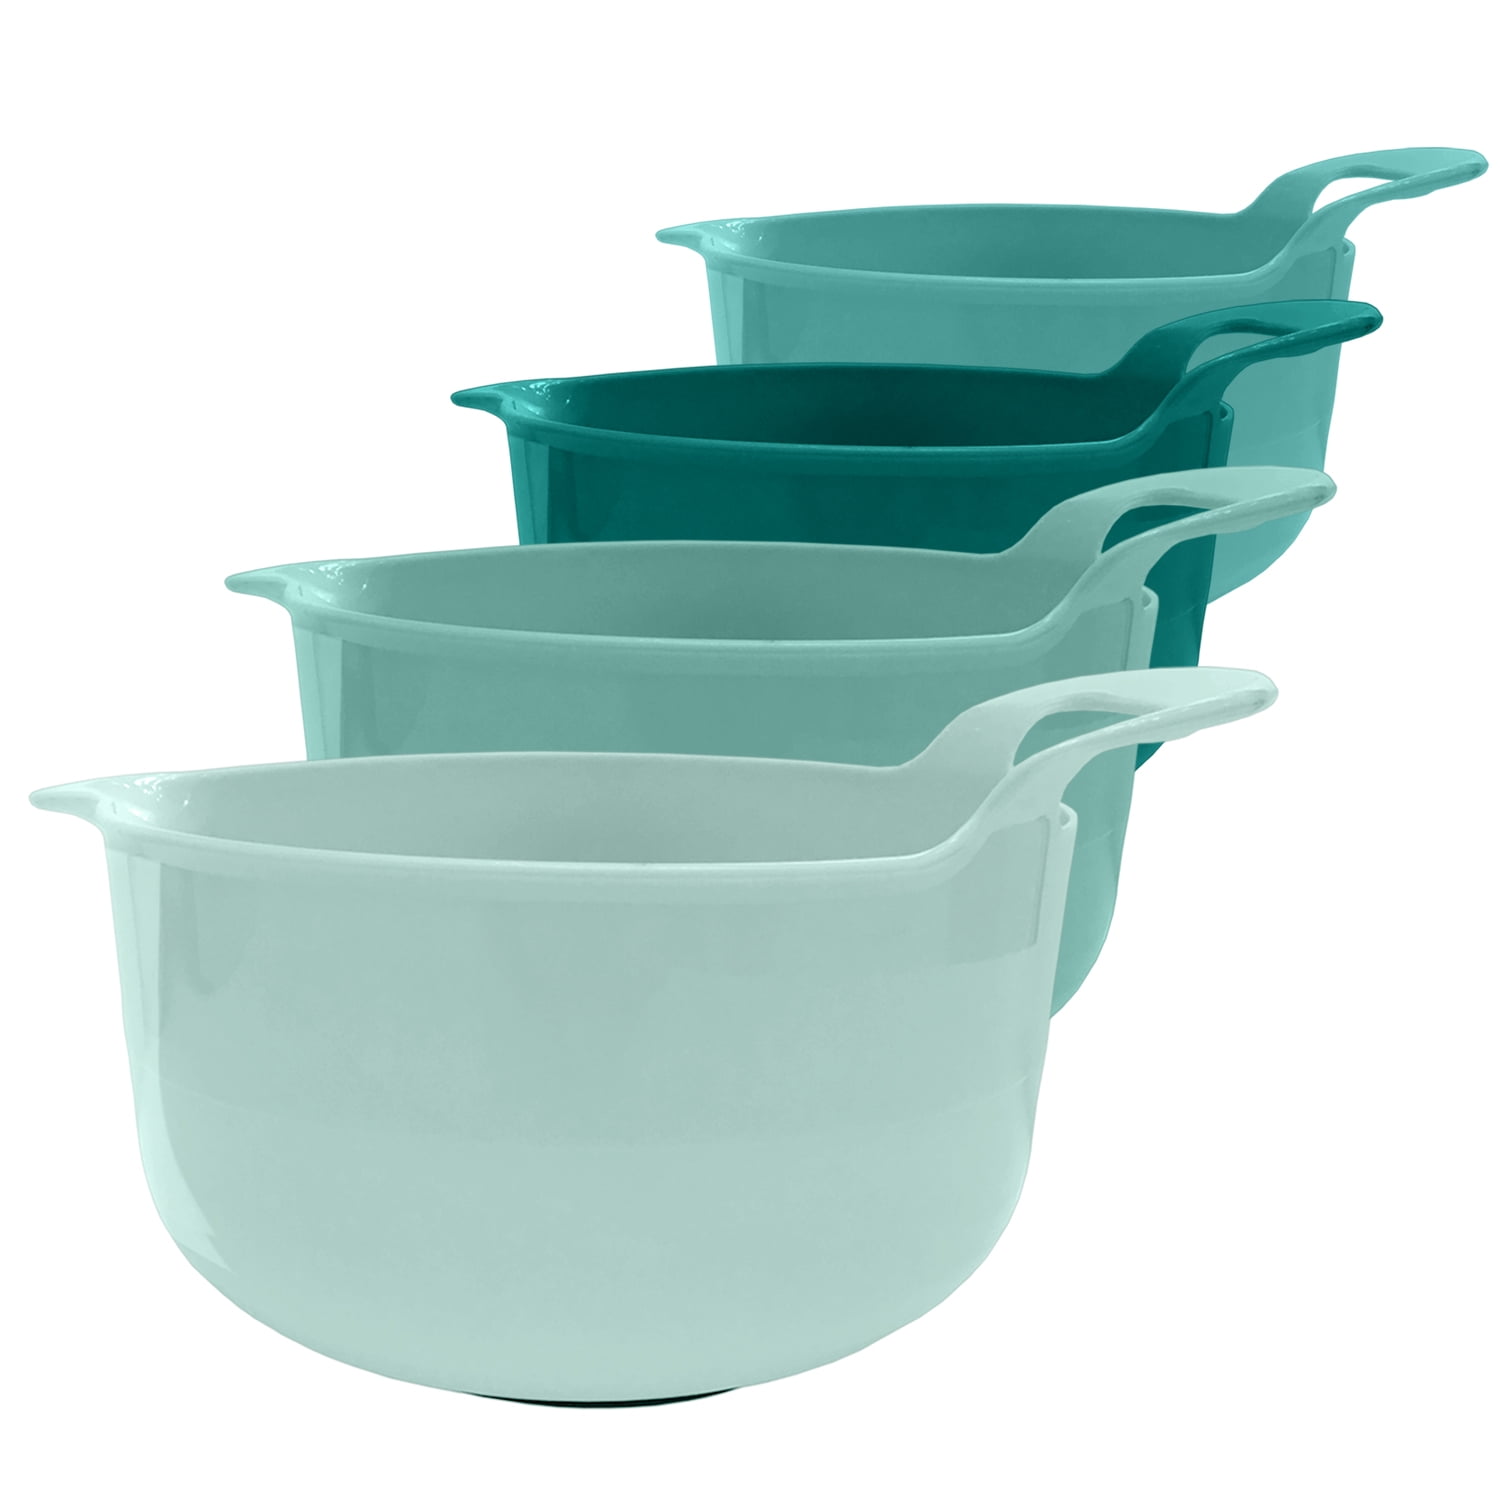 Generic Spring Chef Mixing Bowls Set of 2, Soft Grip, Non-skid